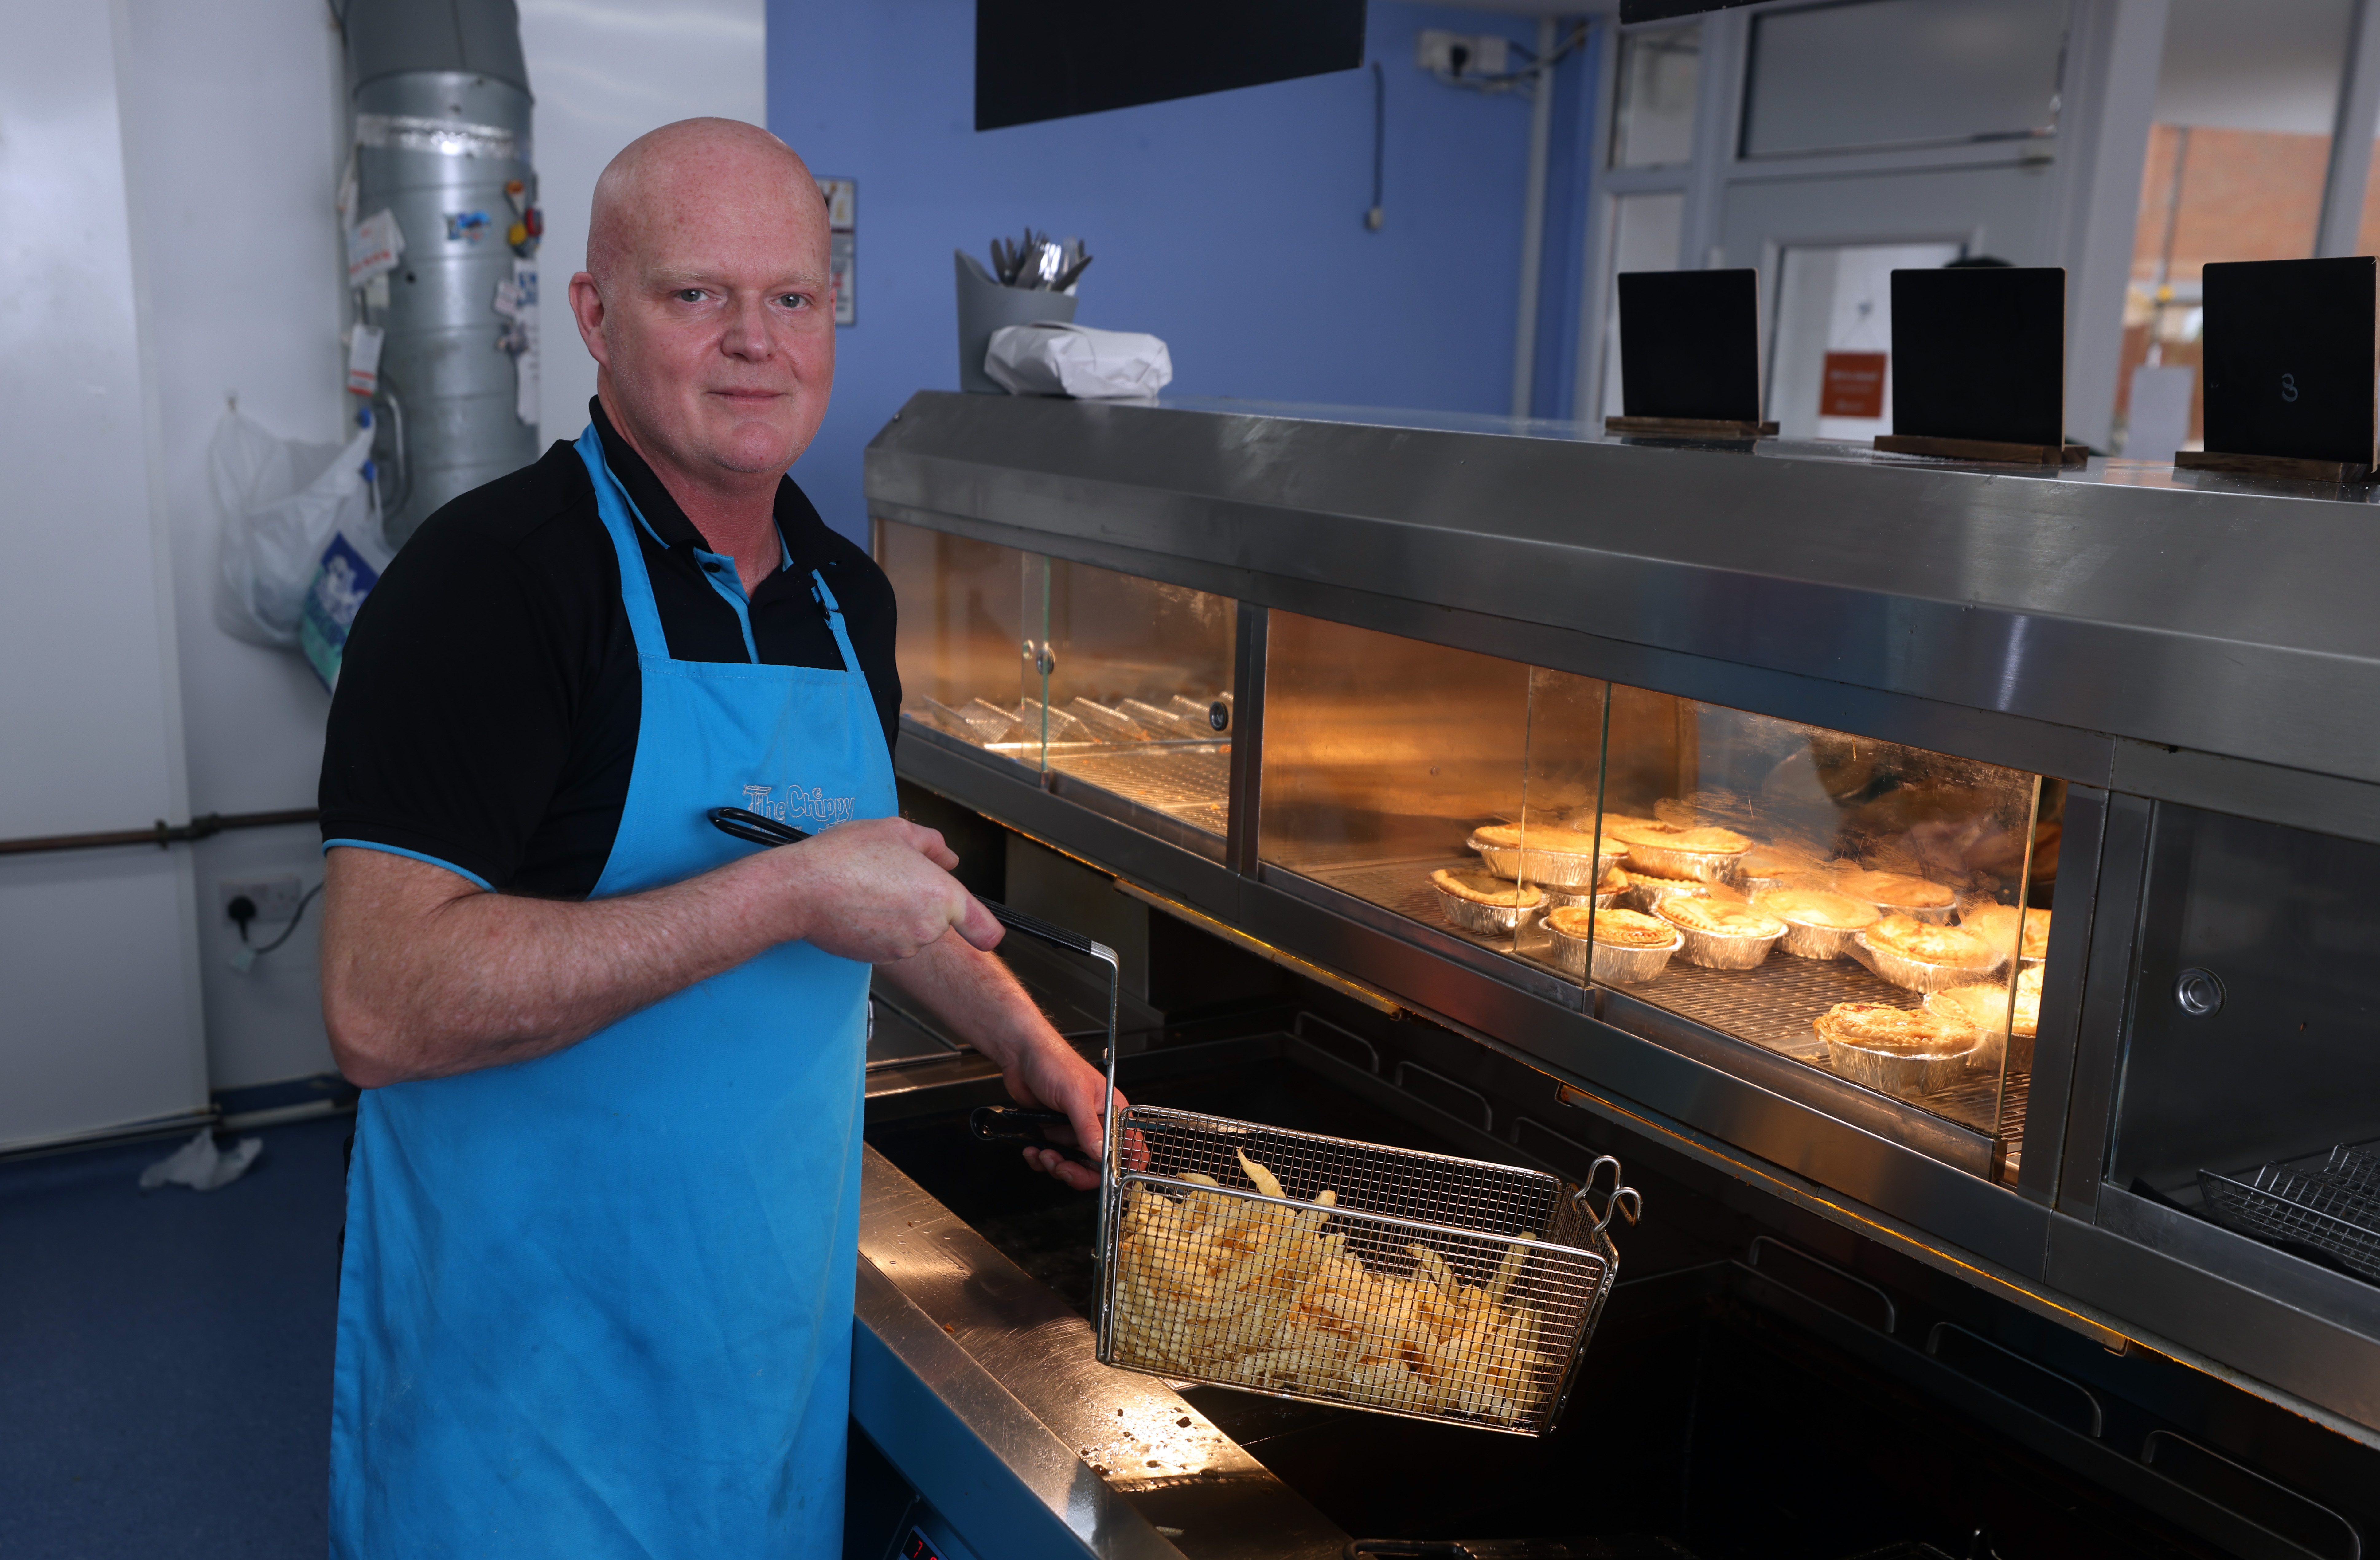 Andy Catterall owns the local chippy and said the area has plenty of potential